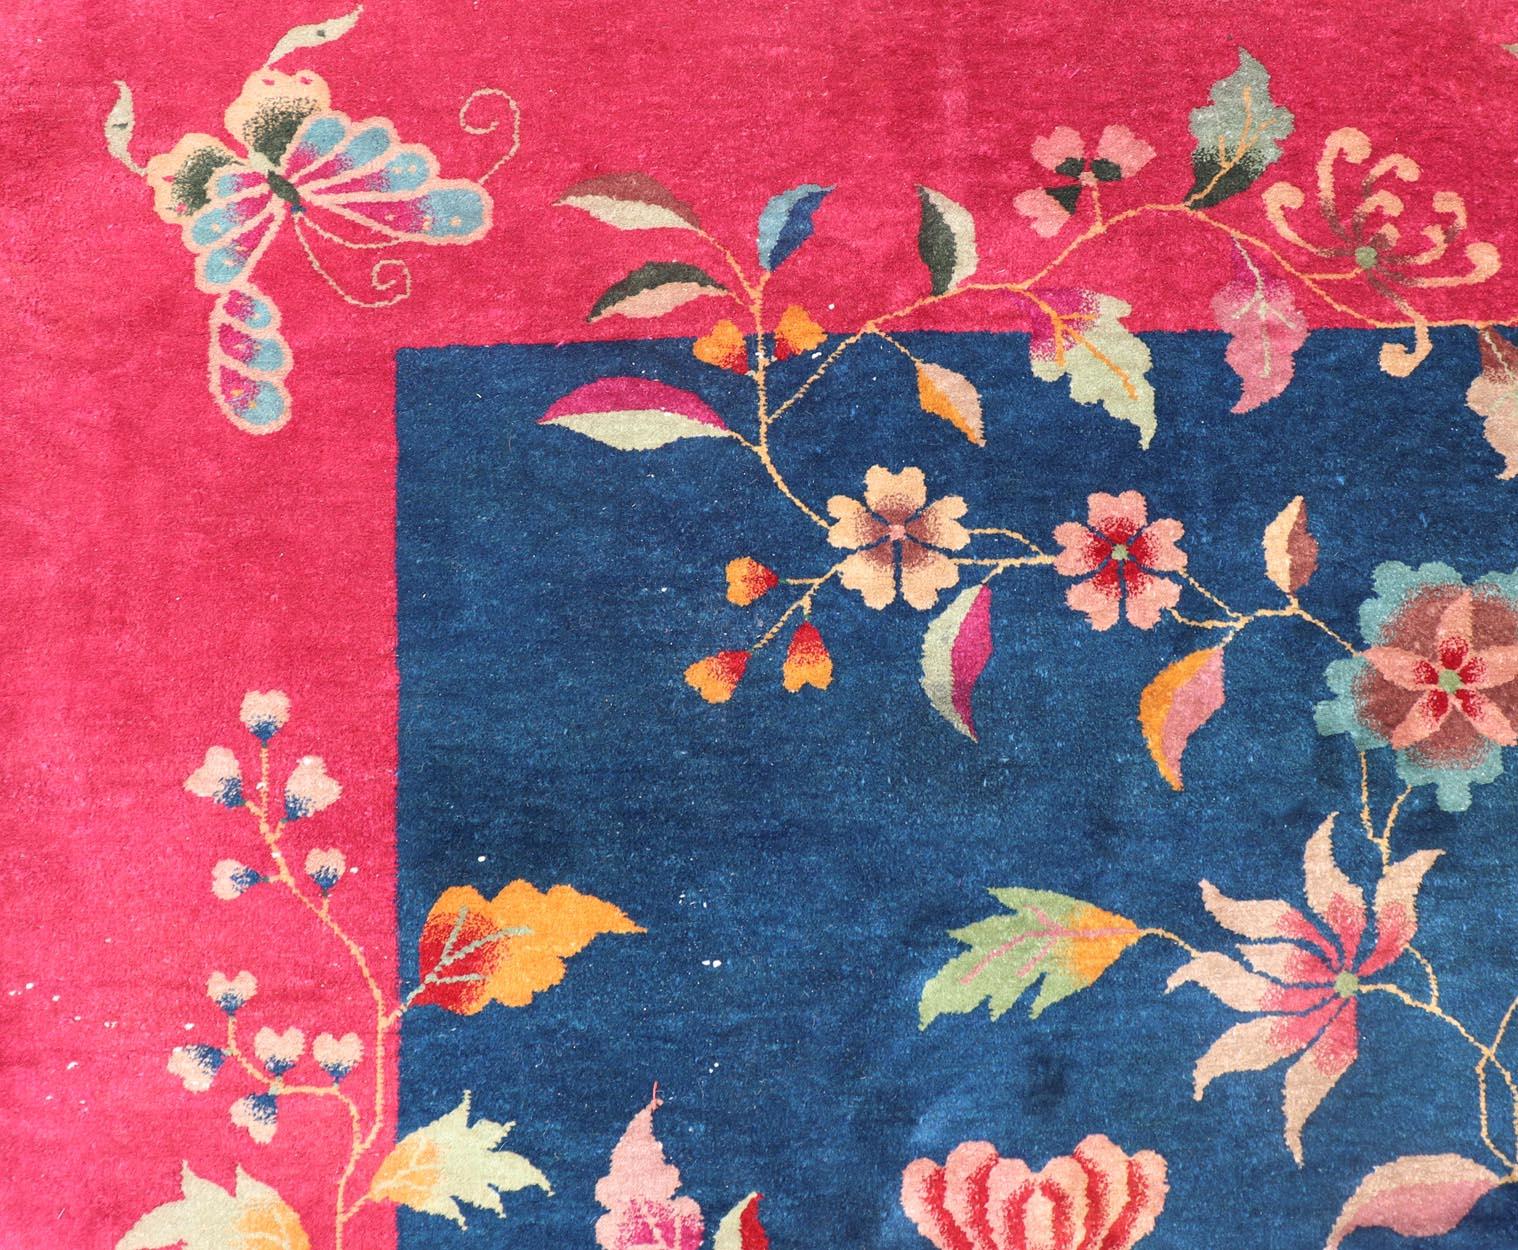 Blue Background Chinese Art Deco Rug with Large Vining Flowers and Leaves. Keivan Woven Arts / rug X23-0603, country of origin / type: China / Art Deco, circa 1920.
Measures: 9'0 x 11'4 
Alive with color, this beautiful antique Art Deco Chinese rug